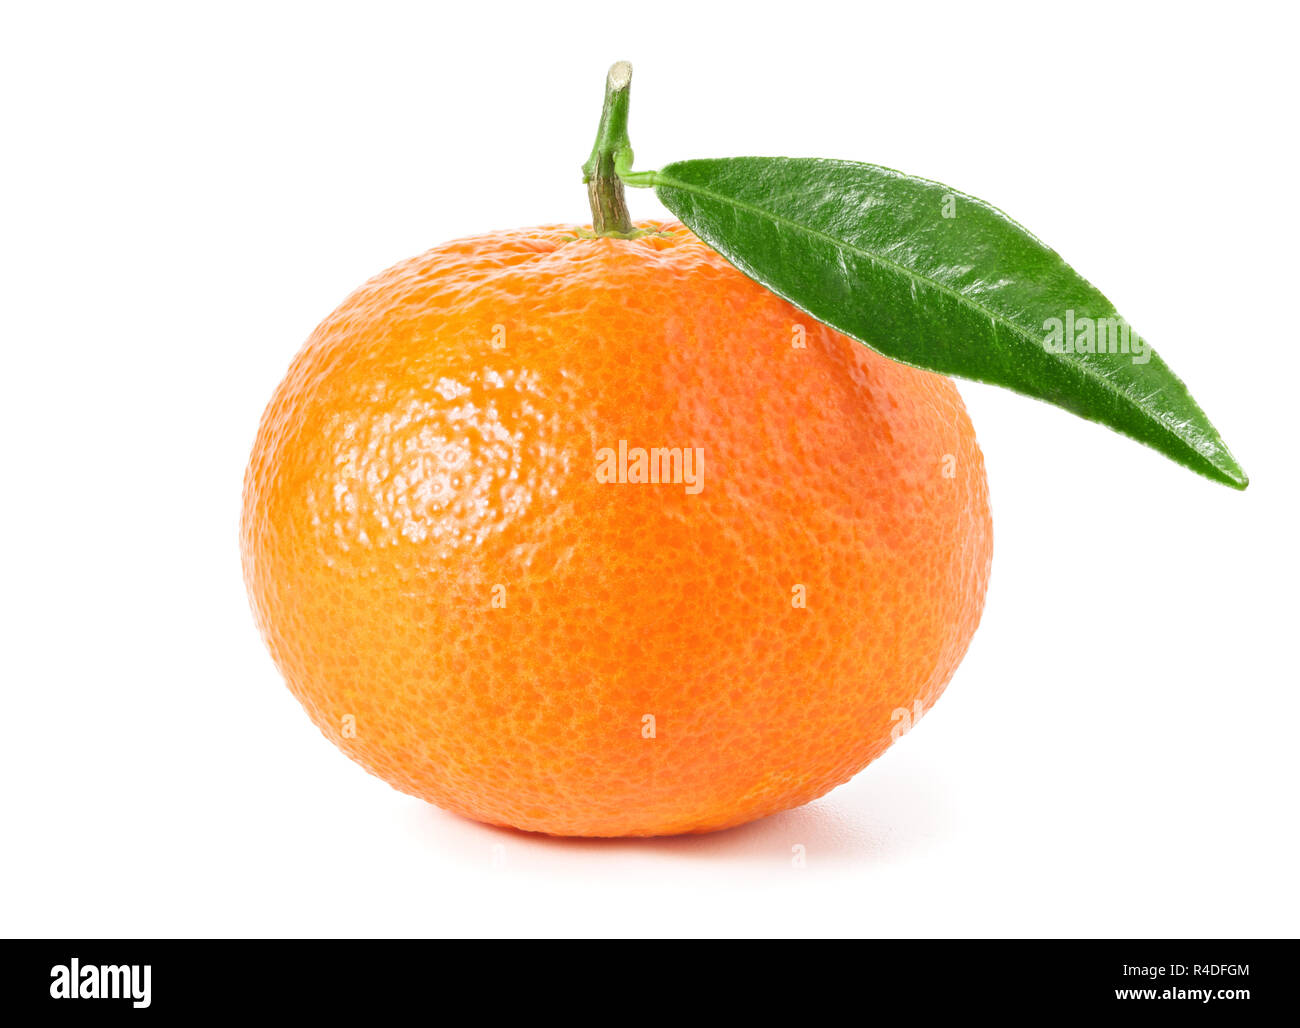 https://c8.alamy.com/comp/R4DFGM/tangerine-or-clementine-with-green-leaf-isolated-on-white-background-R4DFGM.jpg